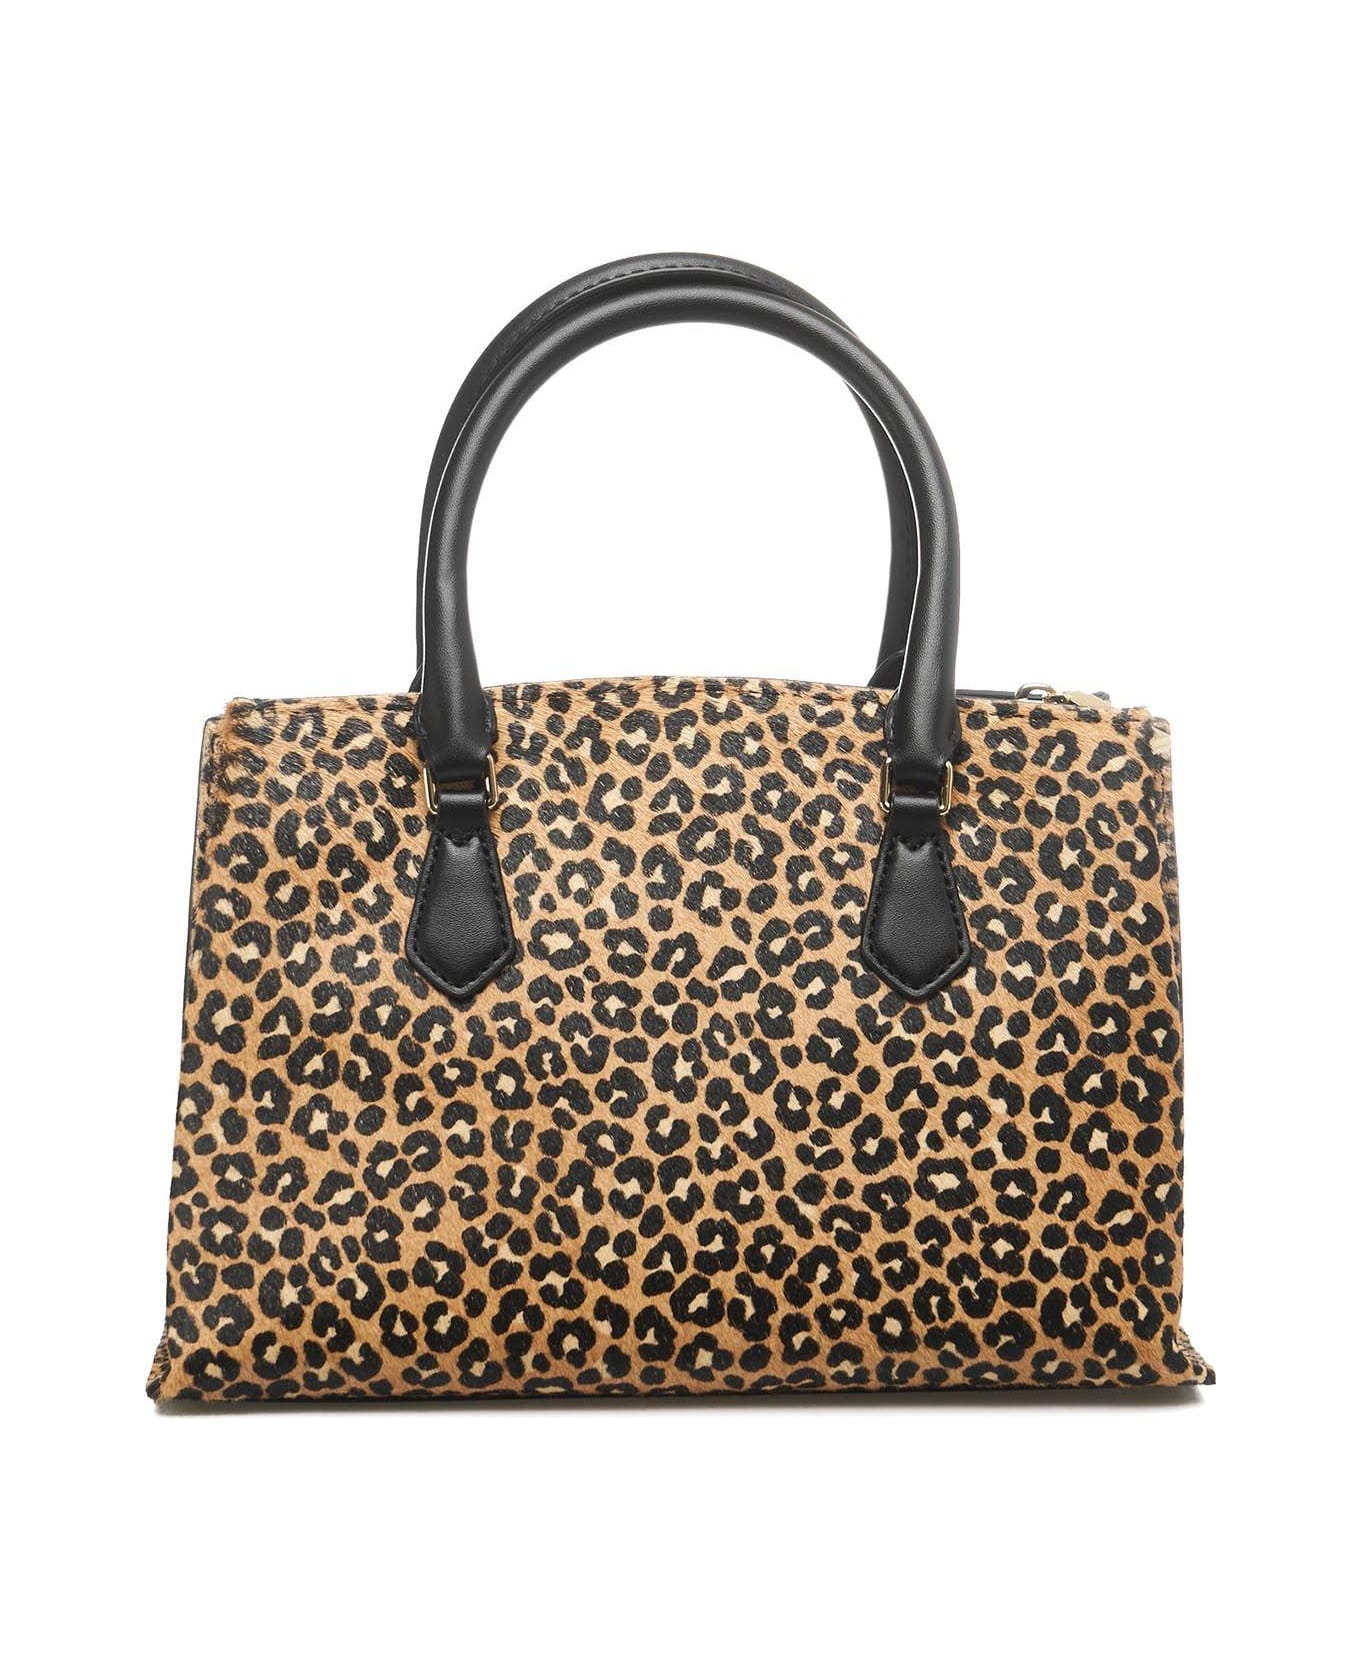 Michael Kors Collection Ruby Leopard Printed Small Tote Bag - Black Multi